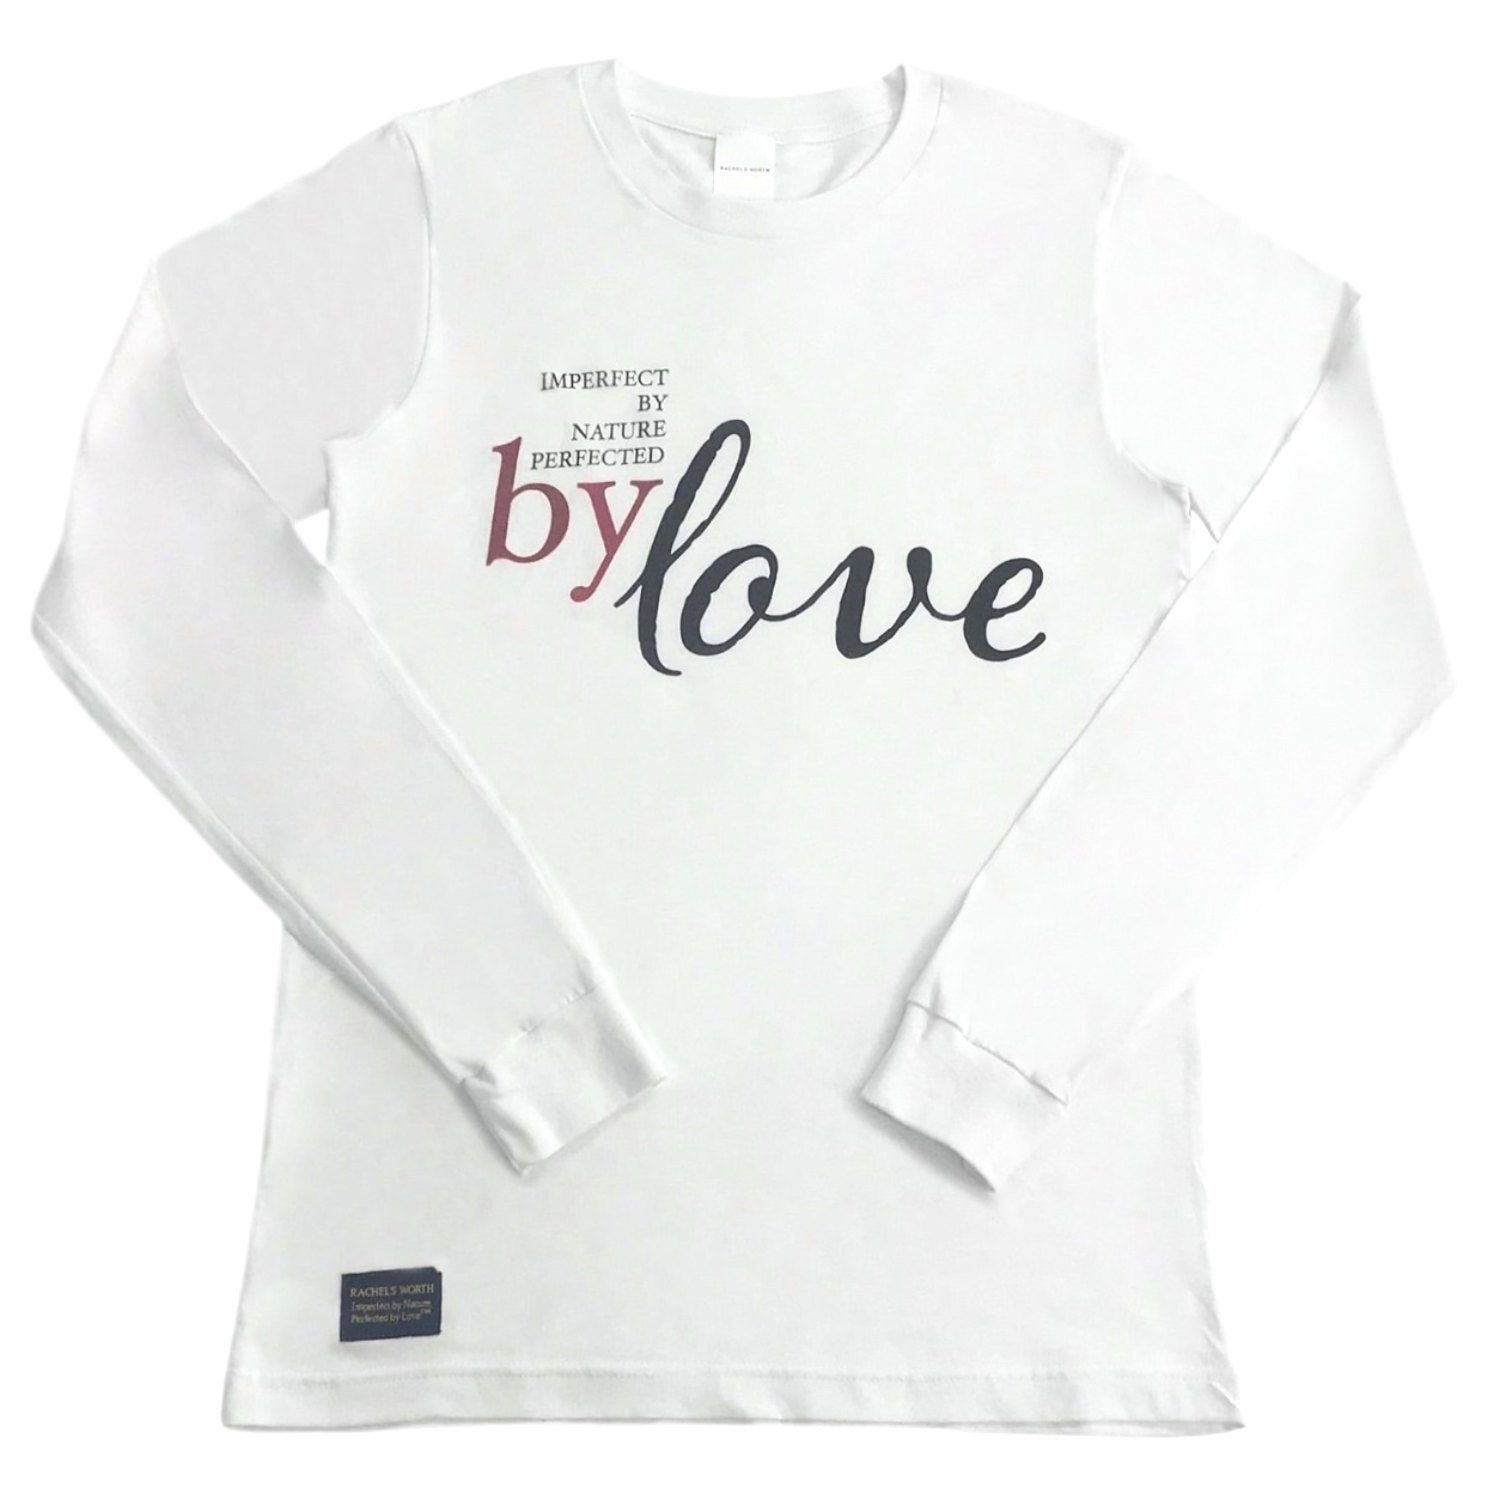 Perfected by Love Long Sleeve White Shirt